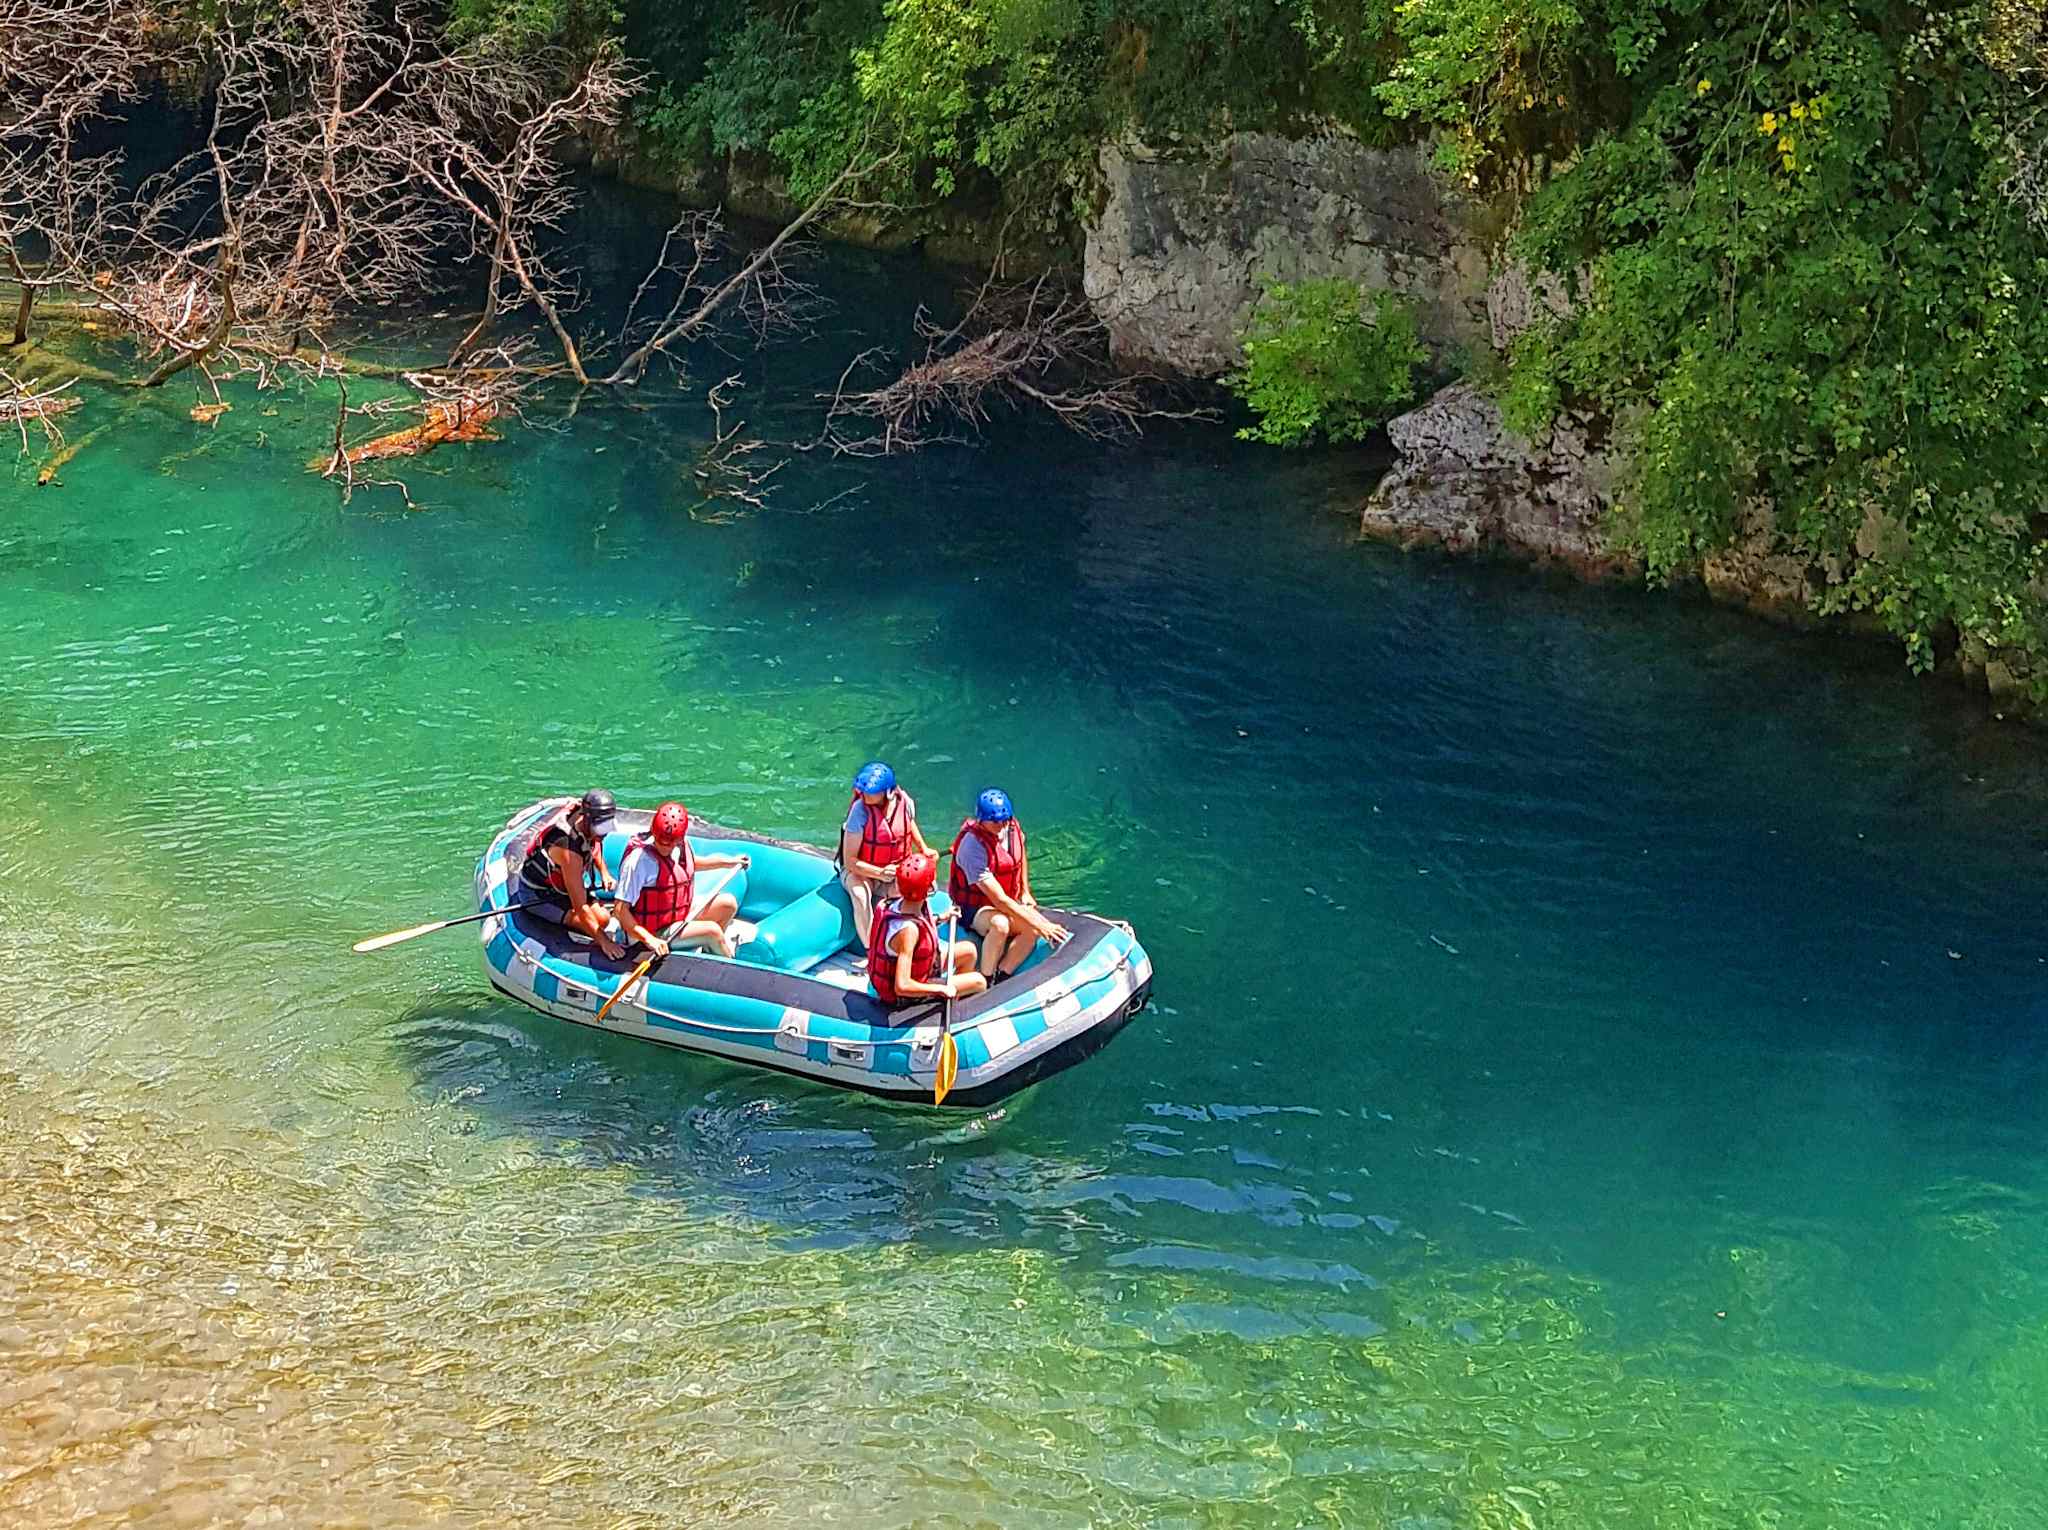 Rafting Voidomatis river, Greece
Getty #1163647306